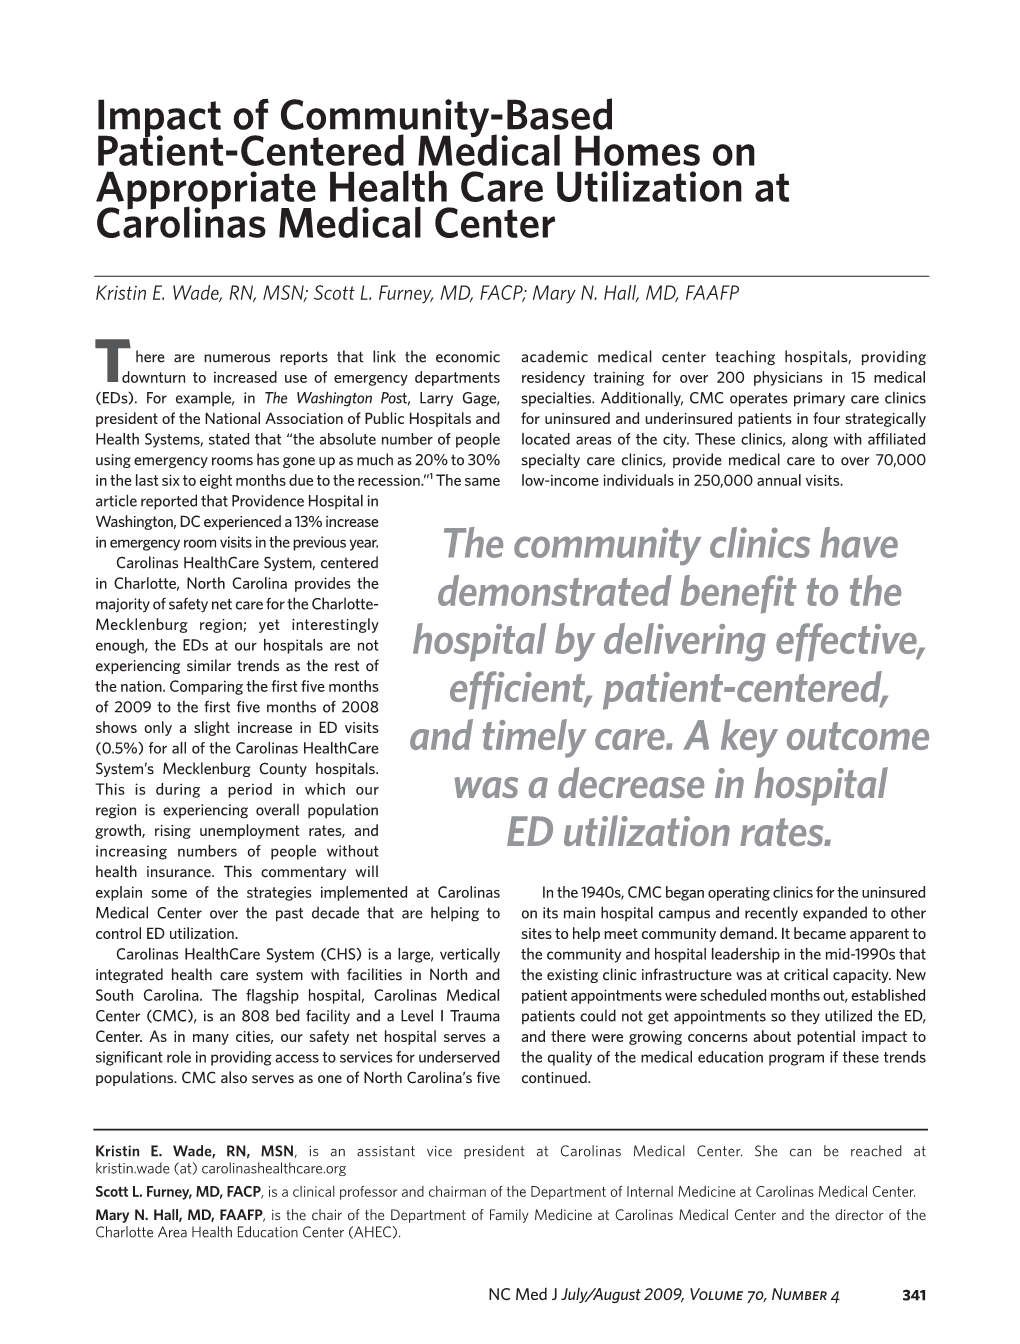 Impact of Community-Based Patient-Centered Medical Homes on Appropriate Health Care Utilization at Carolinas Medical Center